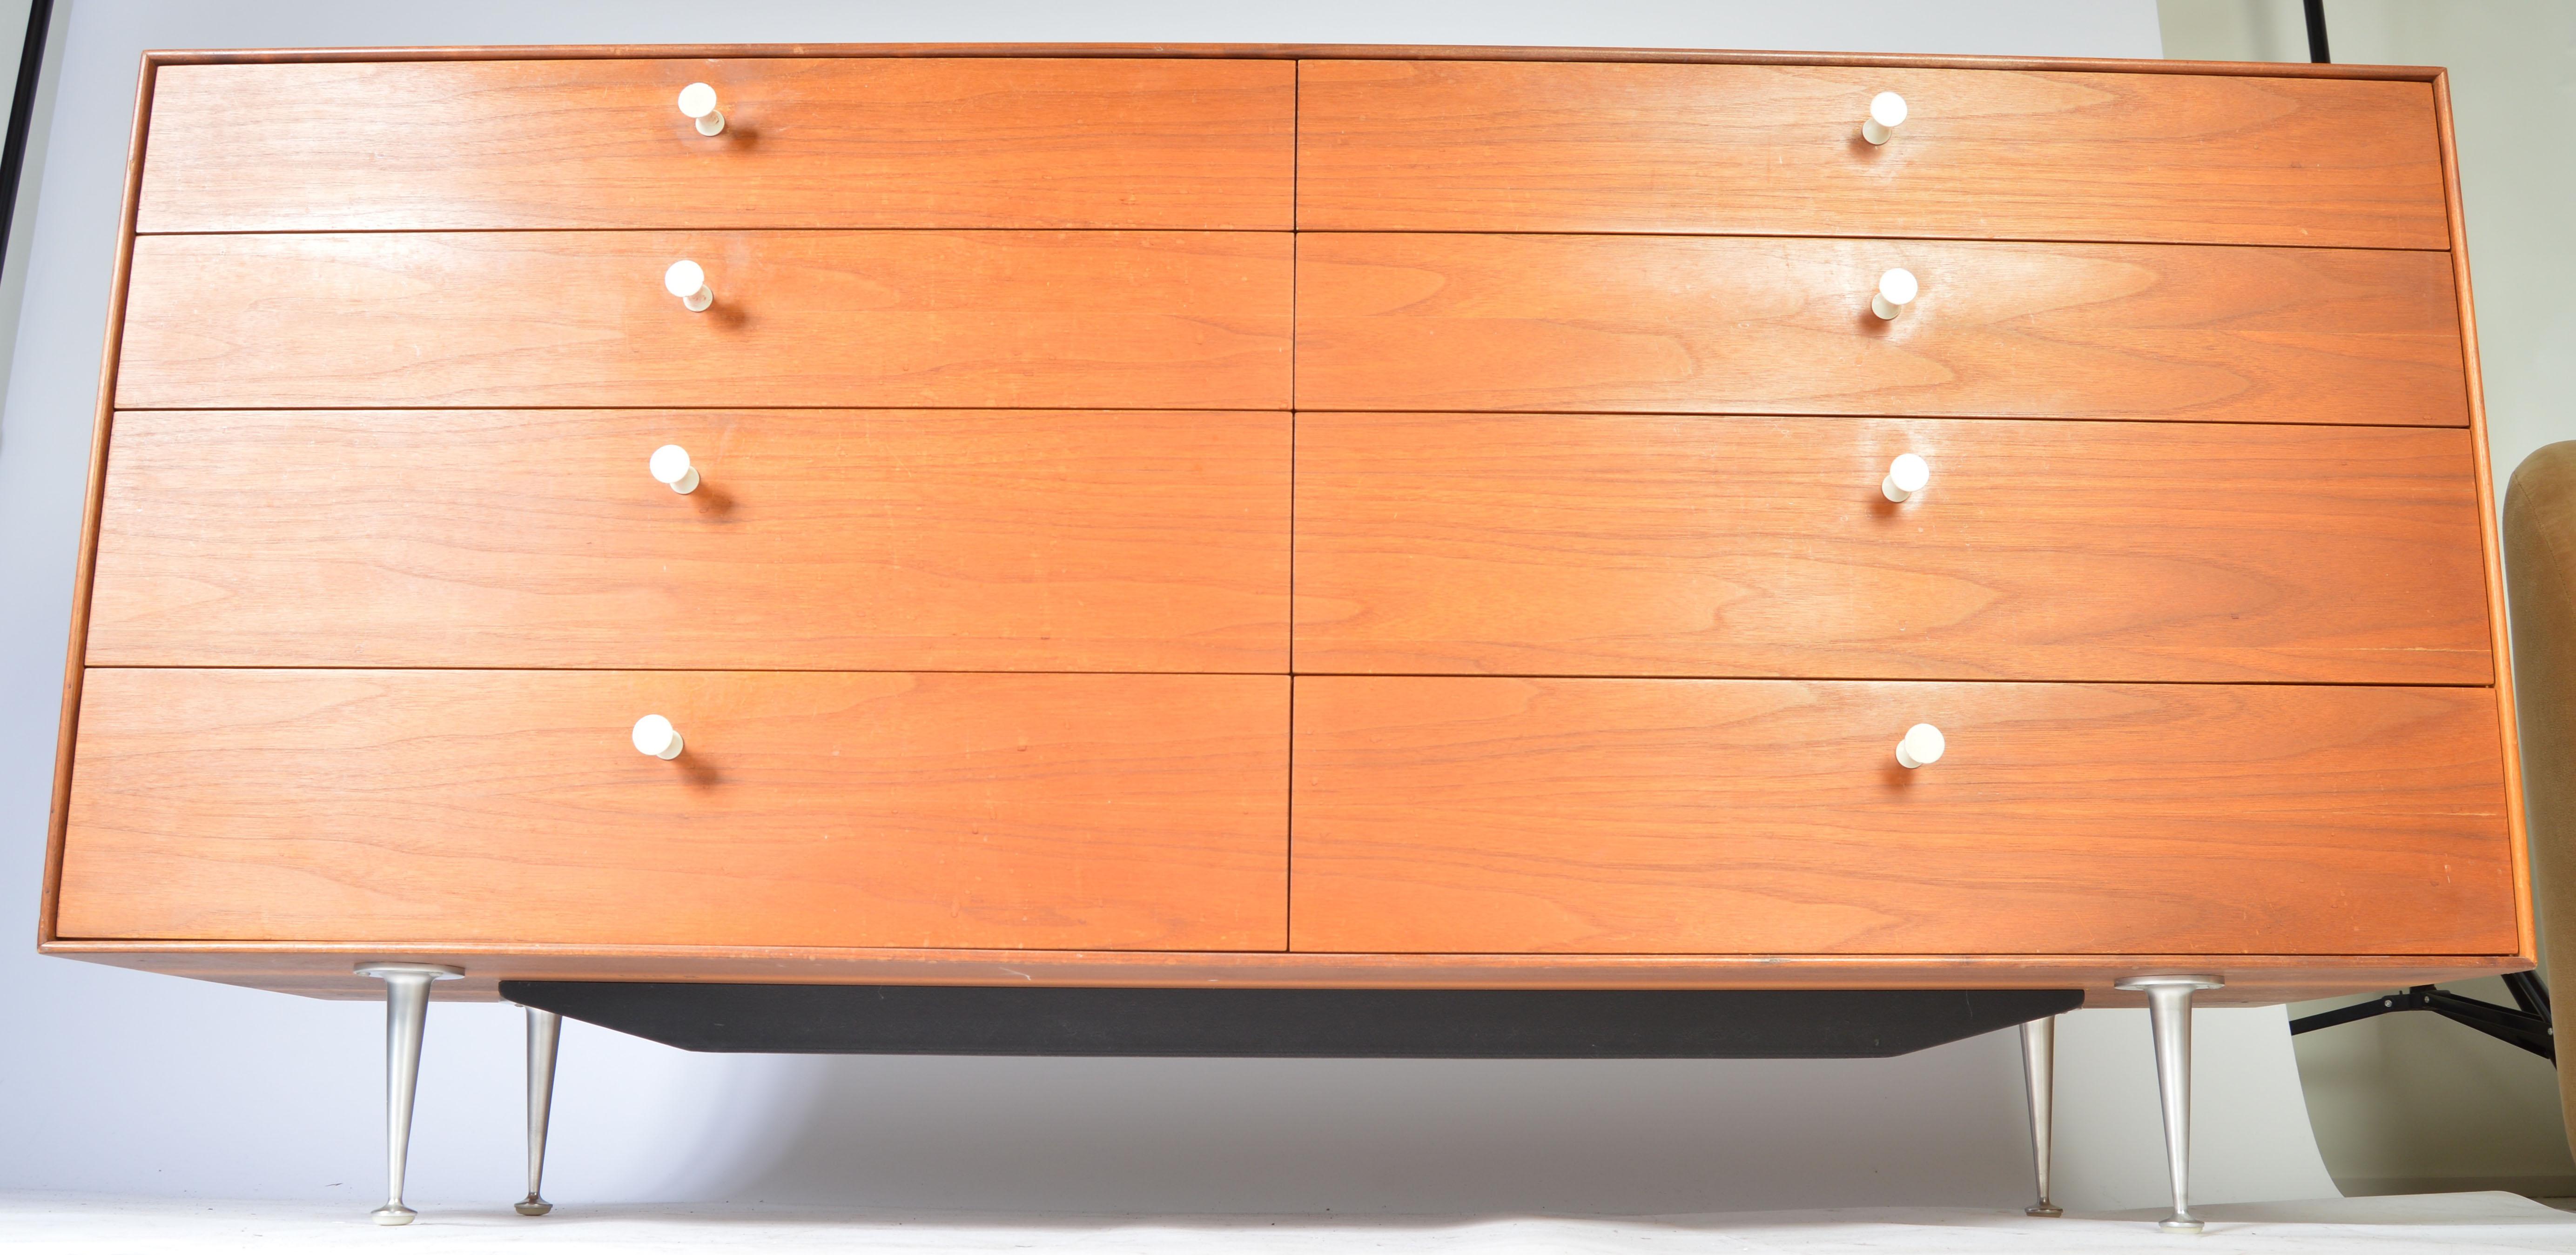 A vintage example of the sophisticated 8-drawer 'Thin Edge' dresser in teak designed by George Nelson for Herman Miller having original porcelain pulls, spun aluminum legs, black steel support bar underneath the case and high gloss white tray based